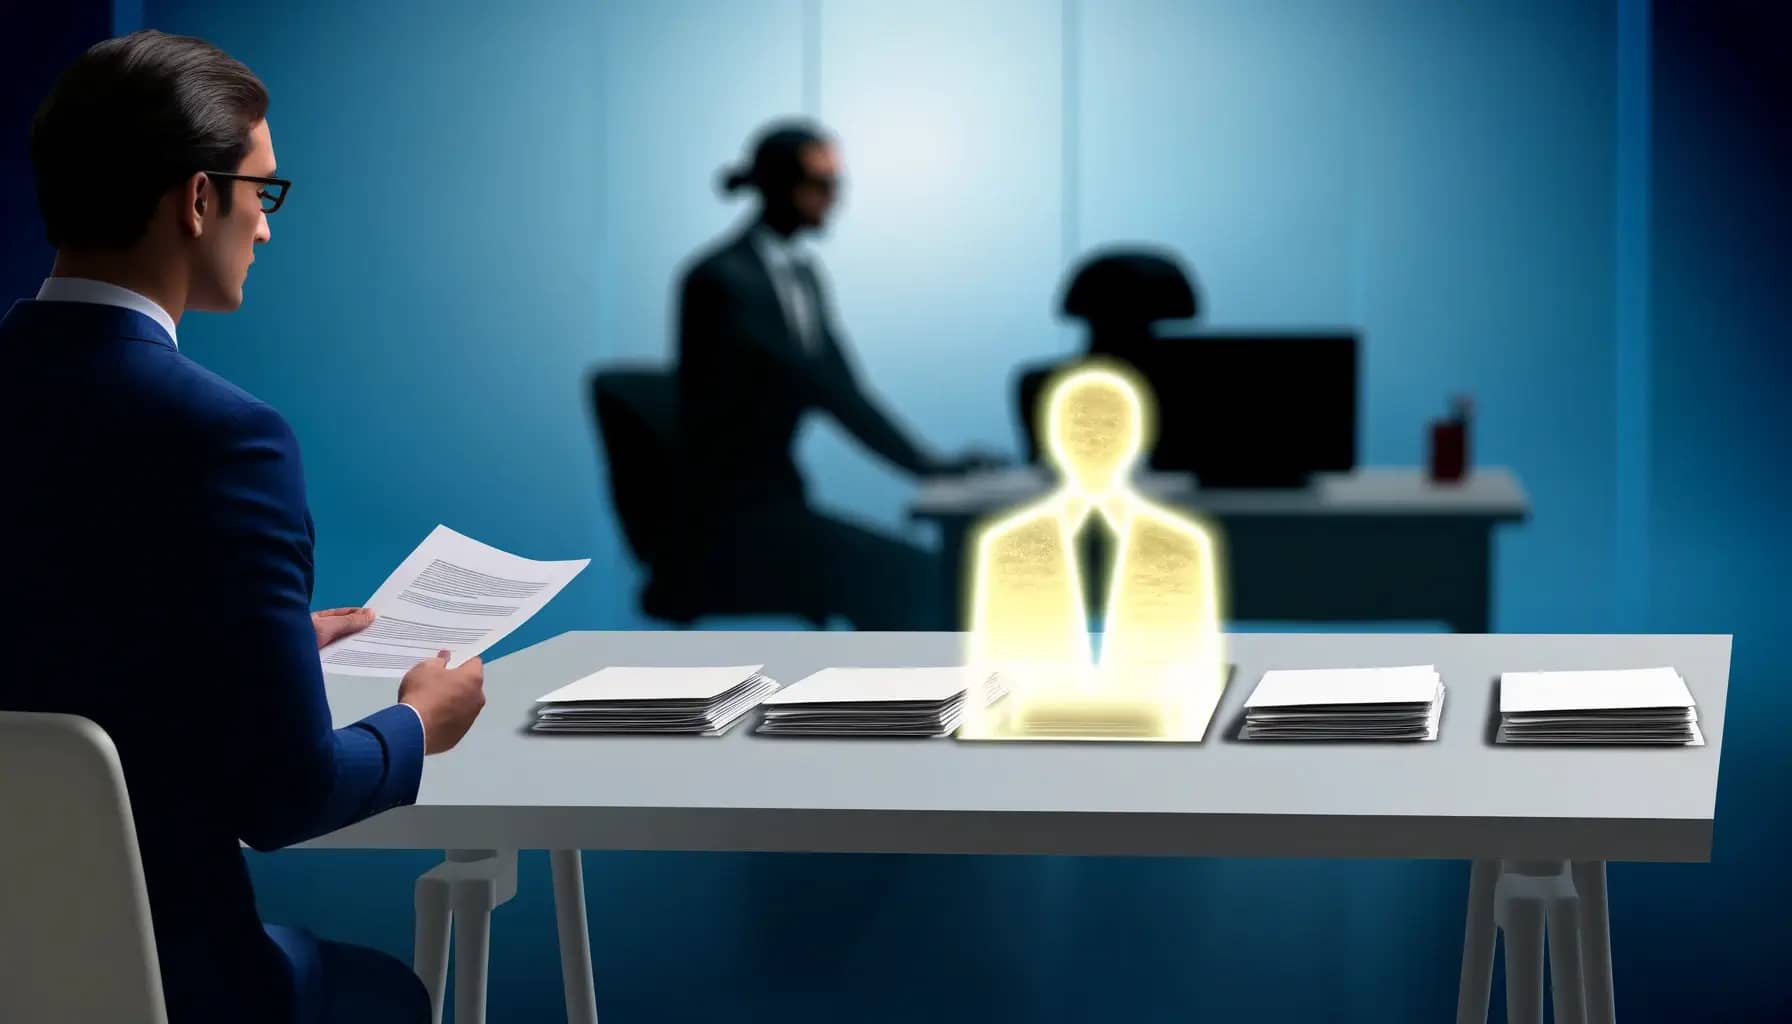 image of a man in a suit reviewing resume documents, with the shadow of a candidate rising from one document